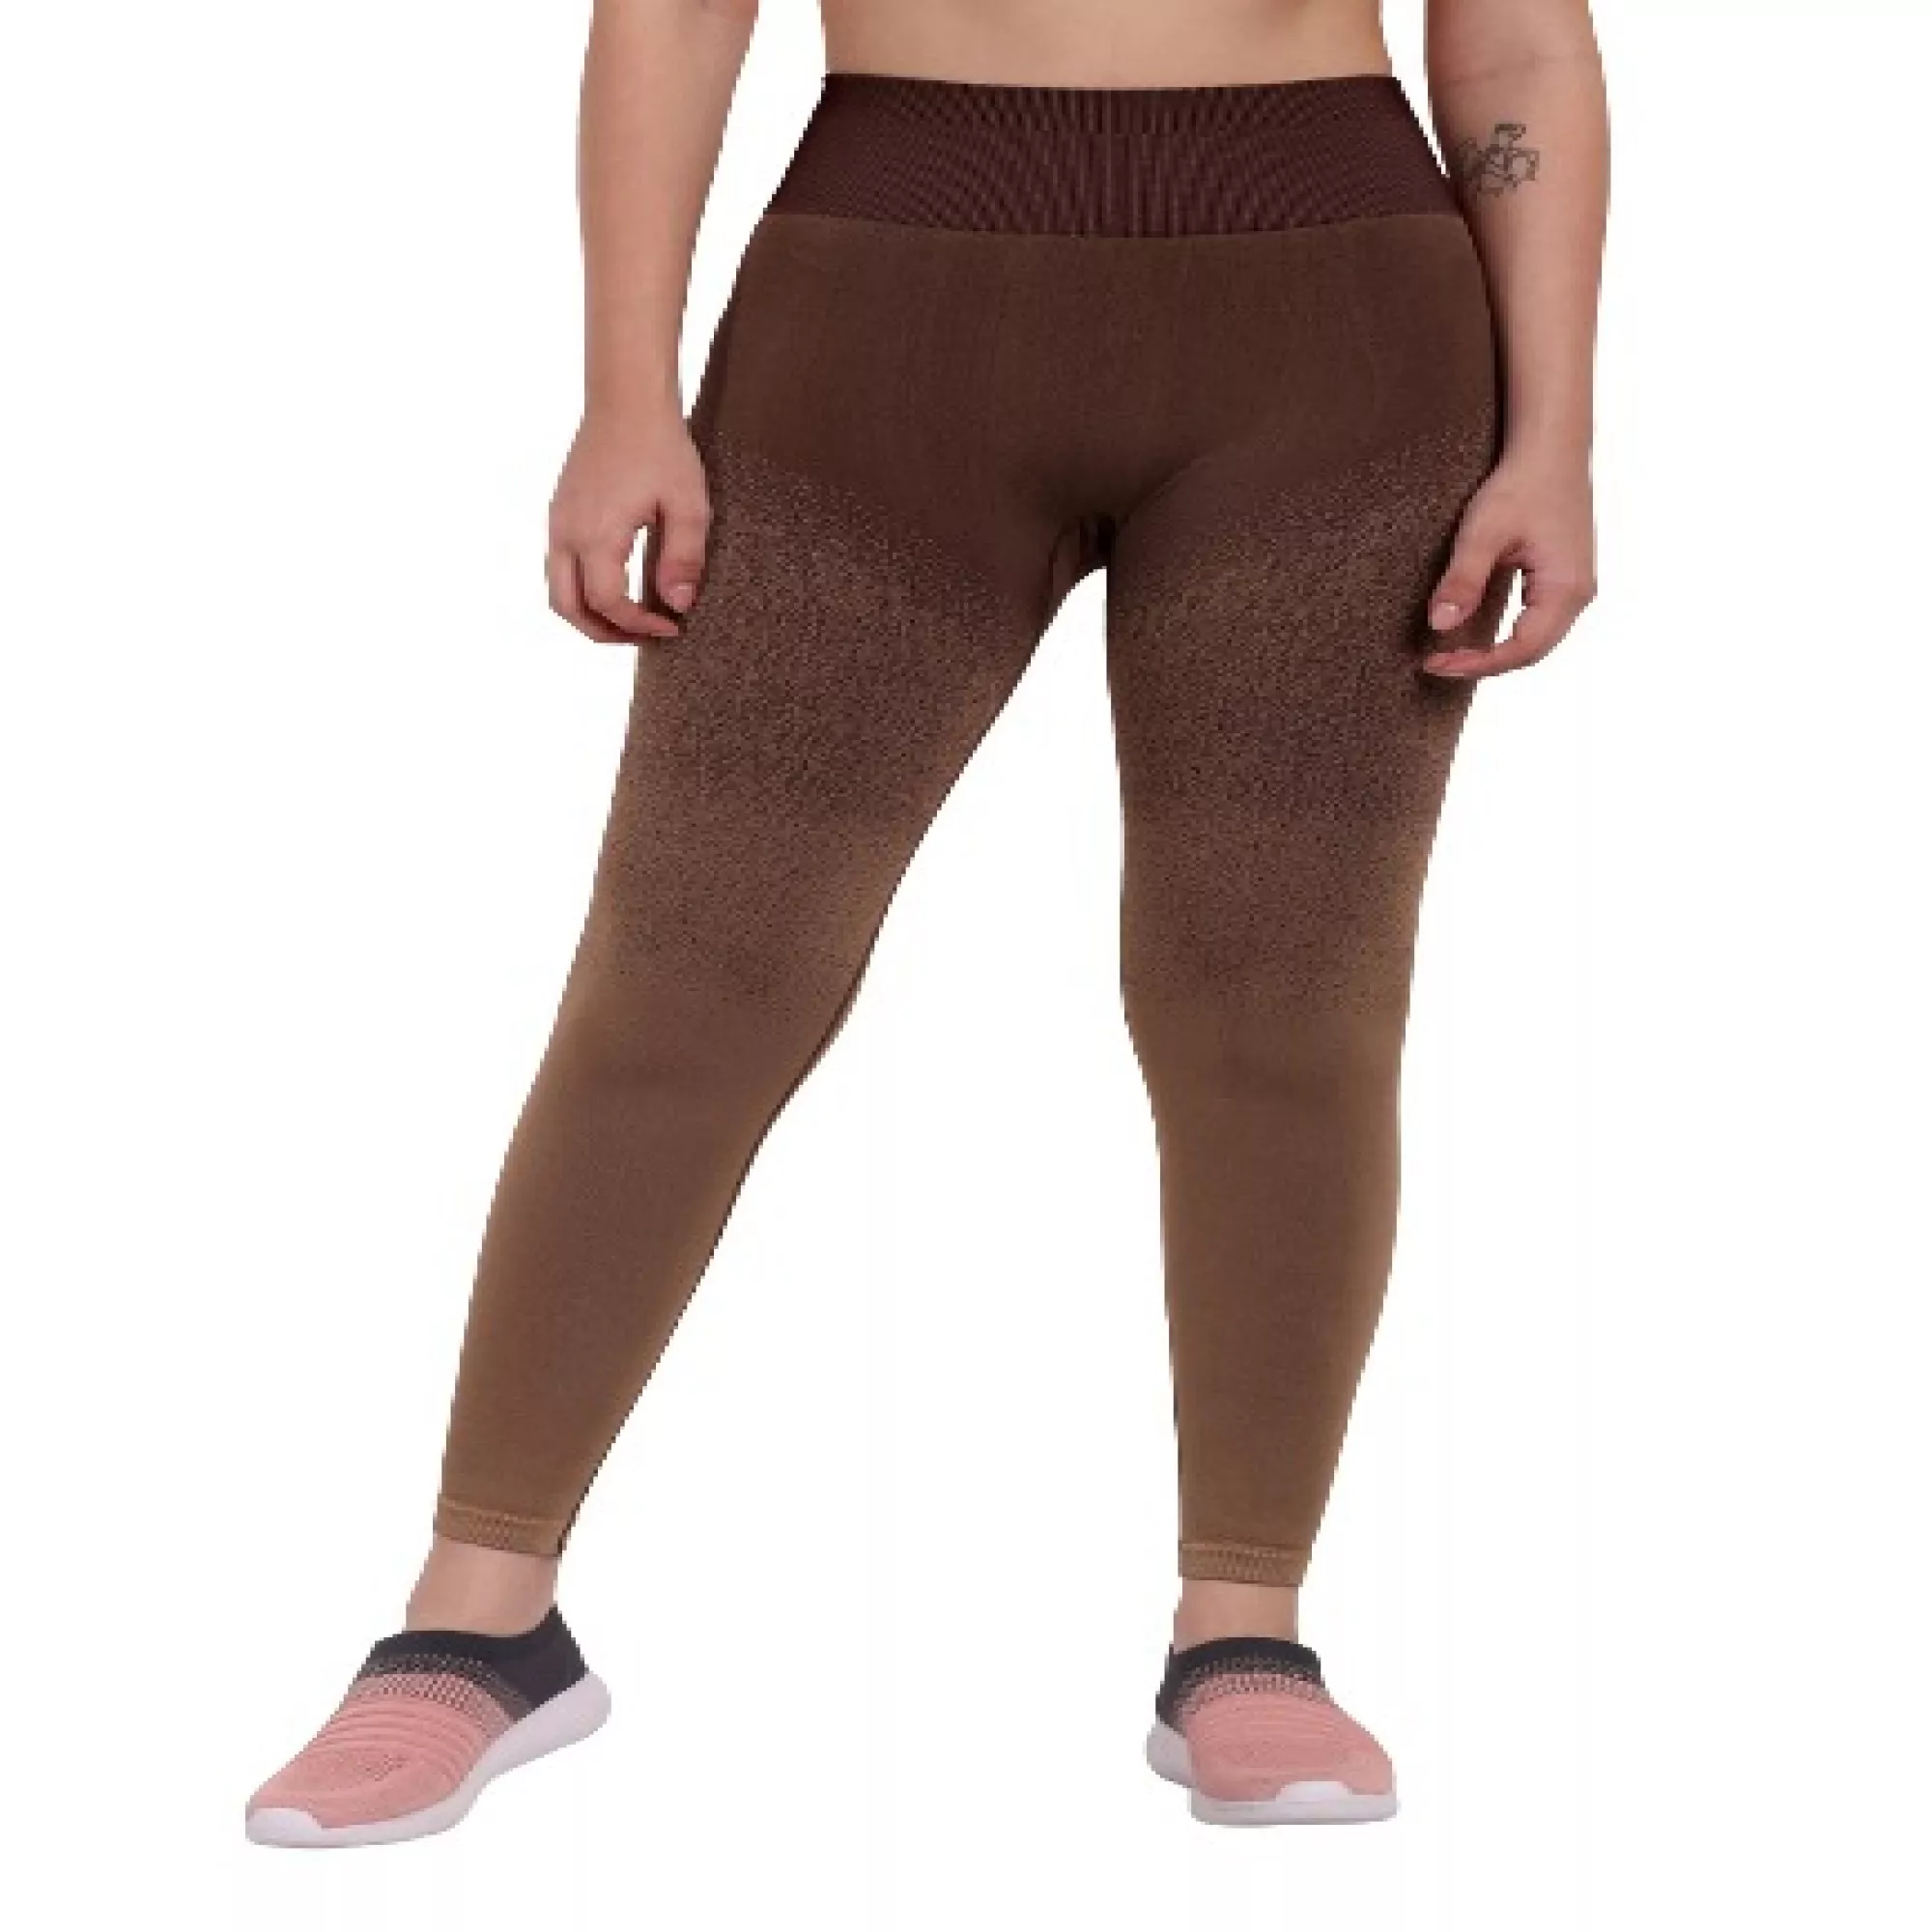 Seamless leggings for women online at best prices- Heka India